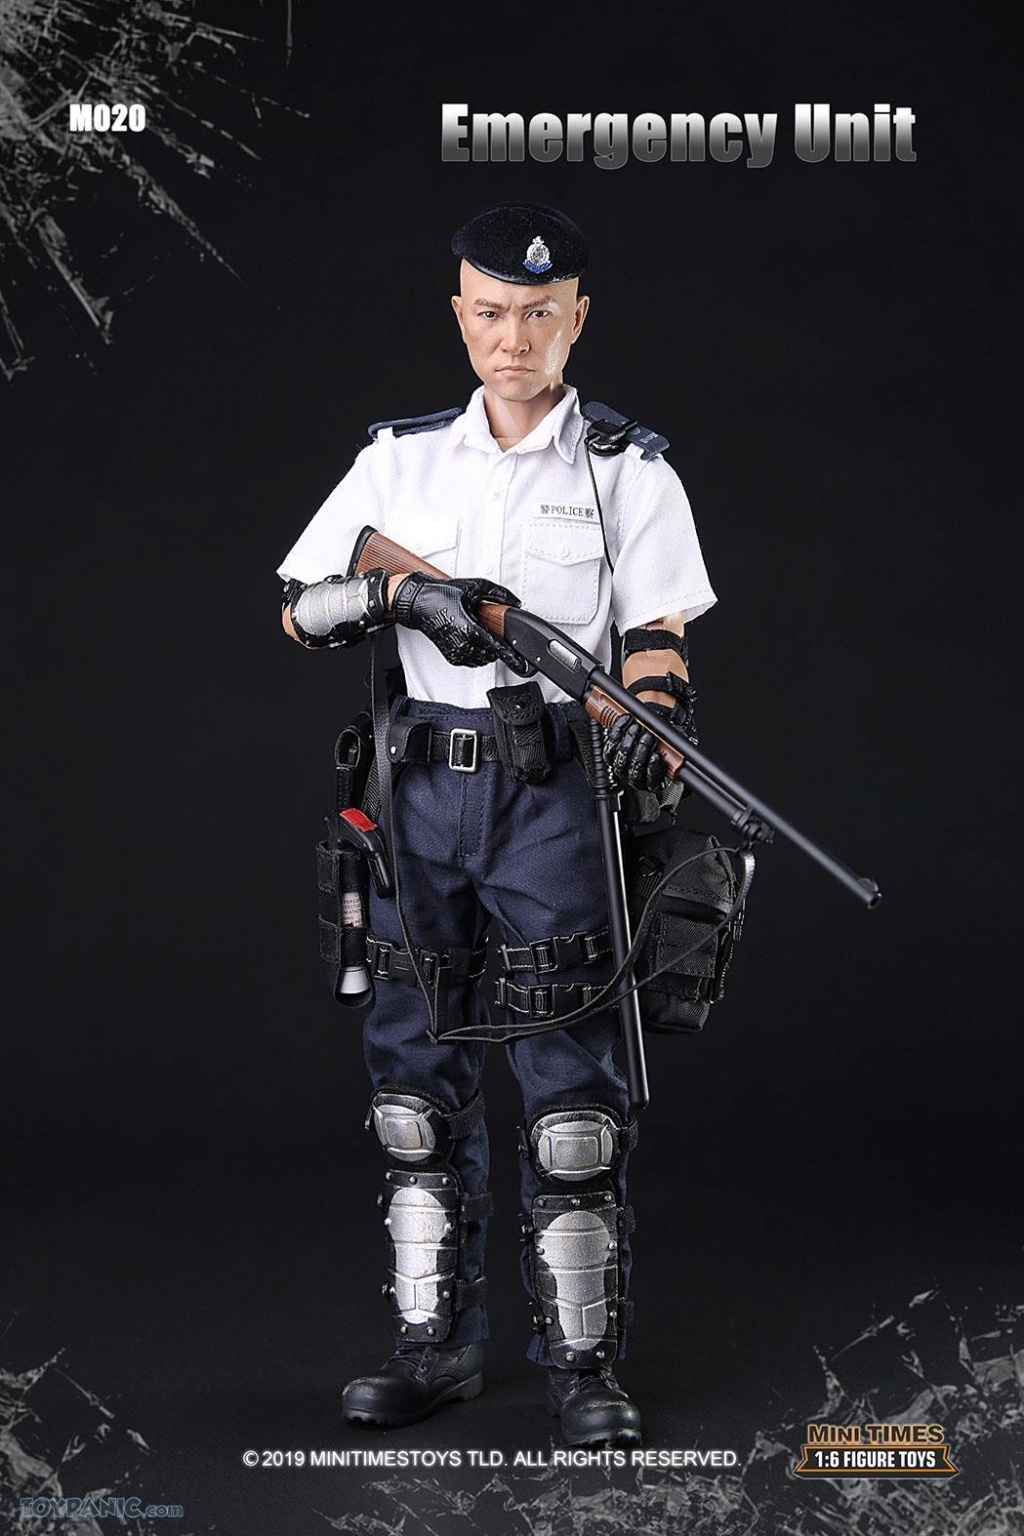 minitimes - NEW PRODUCT: 1/6 scale Hong Kong Police Action Figure From Mini Times Toys Code: MT-M020 10302028